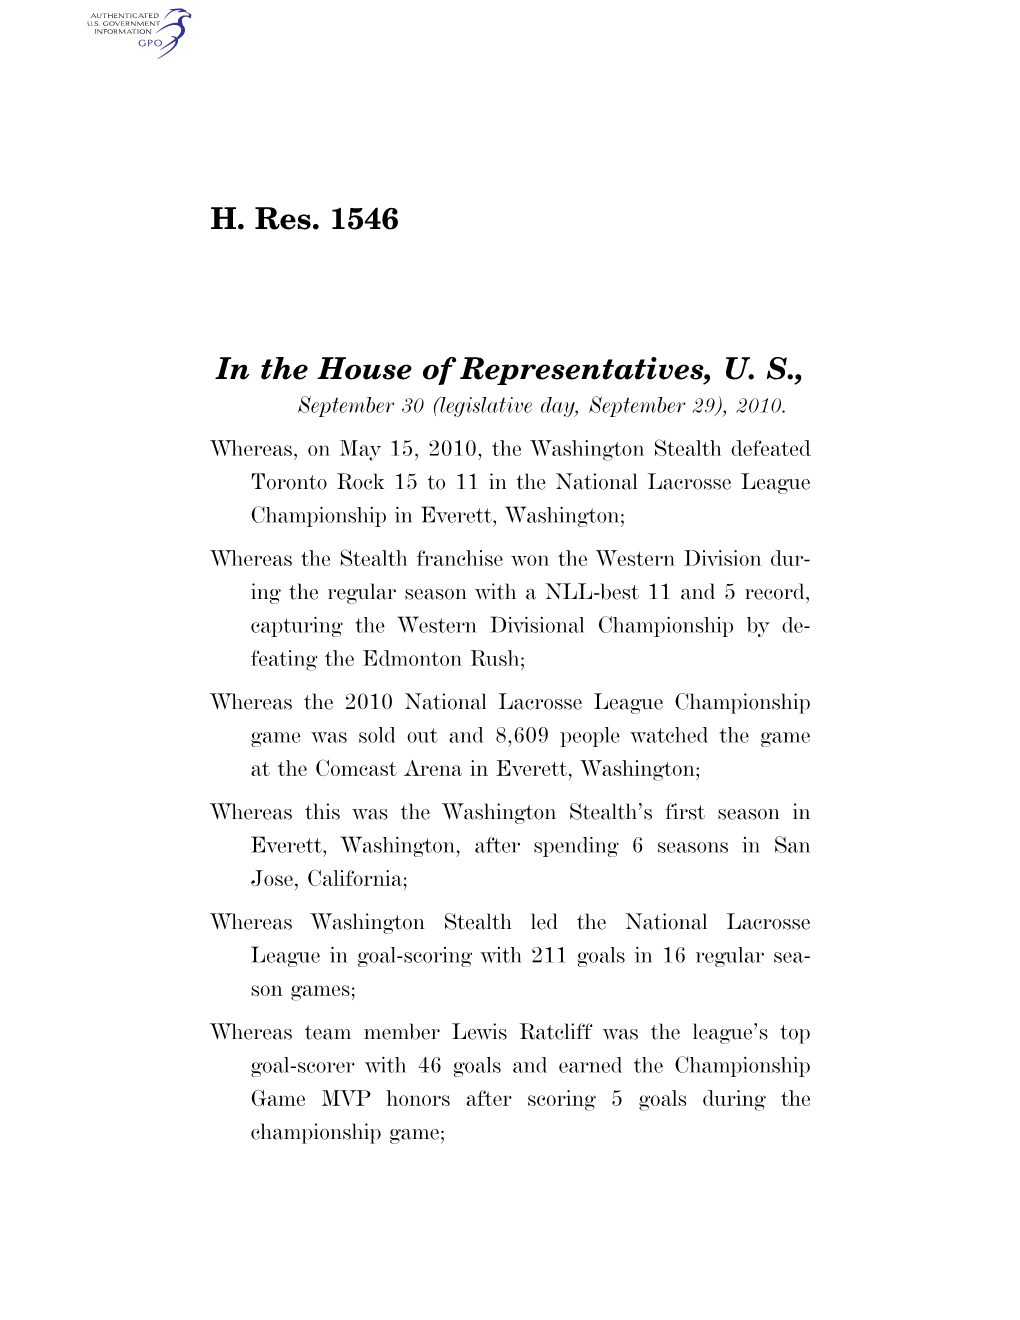 H. Res. 1546 in the House of Representatives, U